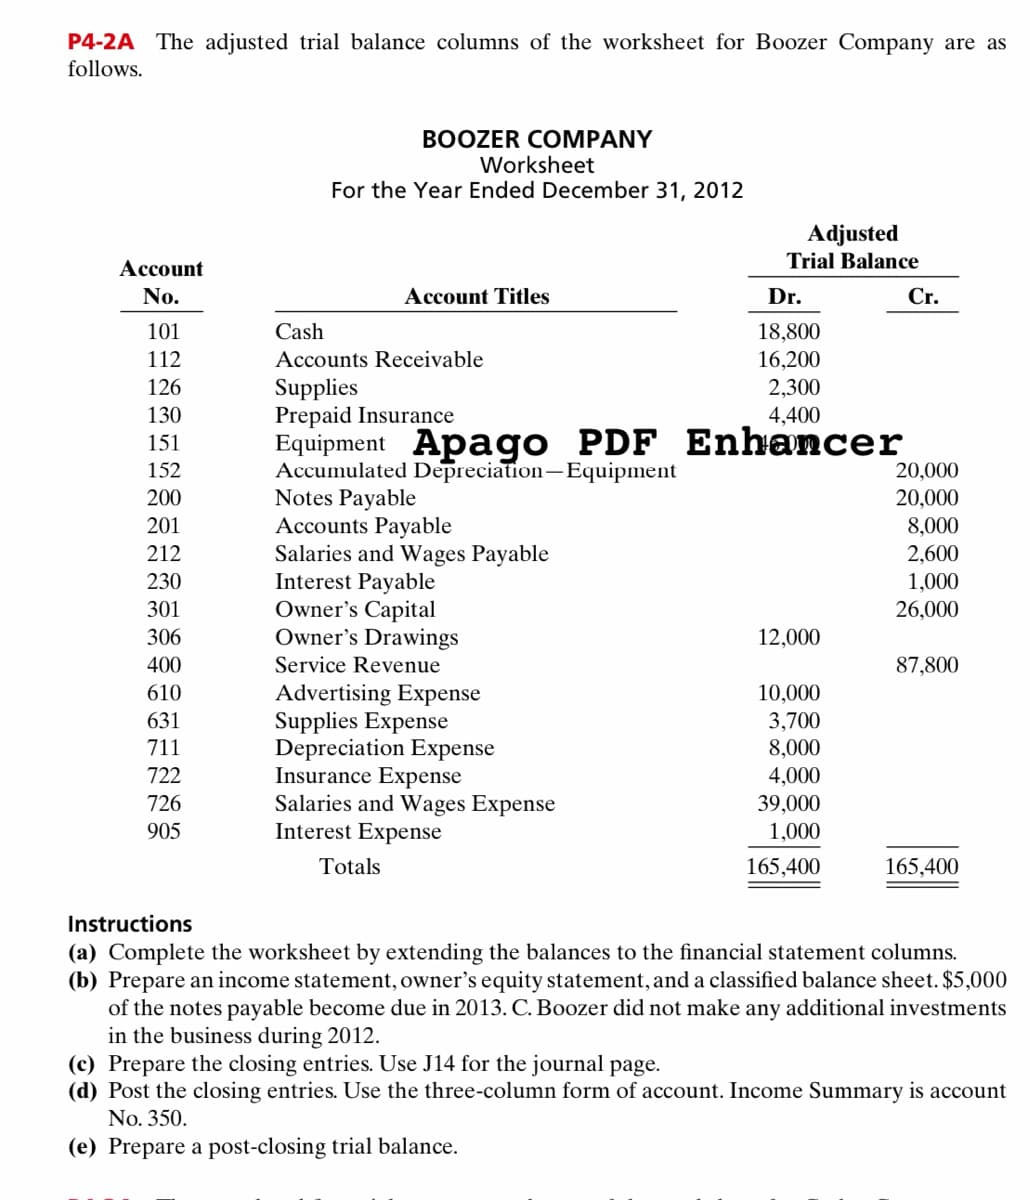 P4-2A The adjusted trial balance columns of the worksheet for Boozer Company are as
follows.
BOOZER COMPANY
Worksheet
For the Year Ended December 31, 2012
Adjusted
Account
Trial Balance
No.
Account Titles
Dr.
Cr.
101
Cash
18,800
112
Accounts Receivable
16,200
Supplies
Prepaid Insurance
Equipment Apago PDF Enhancer
Accumulated Depreciation-Equipment
Notes Payable
Accounts Payable
Salaries and Wages Payable
Interest Payable
Owner's Capital
Owner's Drawings
126
2,300
130
4,400
151
20,000
20,000
8,000
152
200
201
212
2,600
1,000
26,000
230
301
306
12,000
400
Service Revenue
87,800
610
Advertising Expense
Supplies Expense
Depreciation Expense
Insurance Expense
Salaries and Wages Expense
Interest Expense
10,000
3,700
8,000
631
711
722
4,000
726
39,000
905
1,000
Totals
165,400
165,400
Instructions
(a) Complete the worksheet by extending the balances to the financial statement columns.
(b) Prepare an income statement, owner's equity statement, and a classified balance sheet. $5,000
of the notes payable become due in 2013. C. Boozer did not make any additional investments
in the business during 2012.
(c) Prepare the closing entries. Use J14 for the journal page.
(d) Post the closing entries. Use the three-column form of account. Income Summary is account
No. 350.
(e) Prepare a post-closing trial balance.
